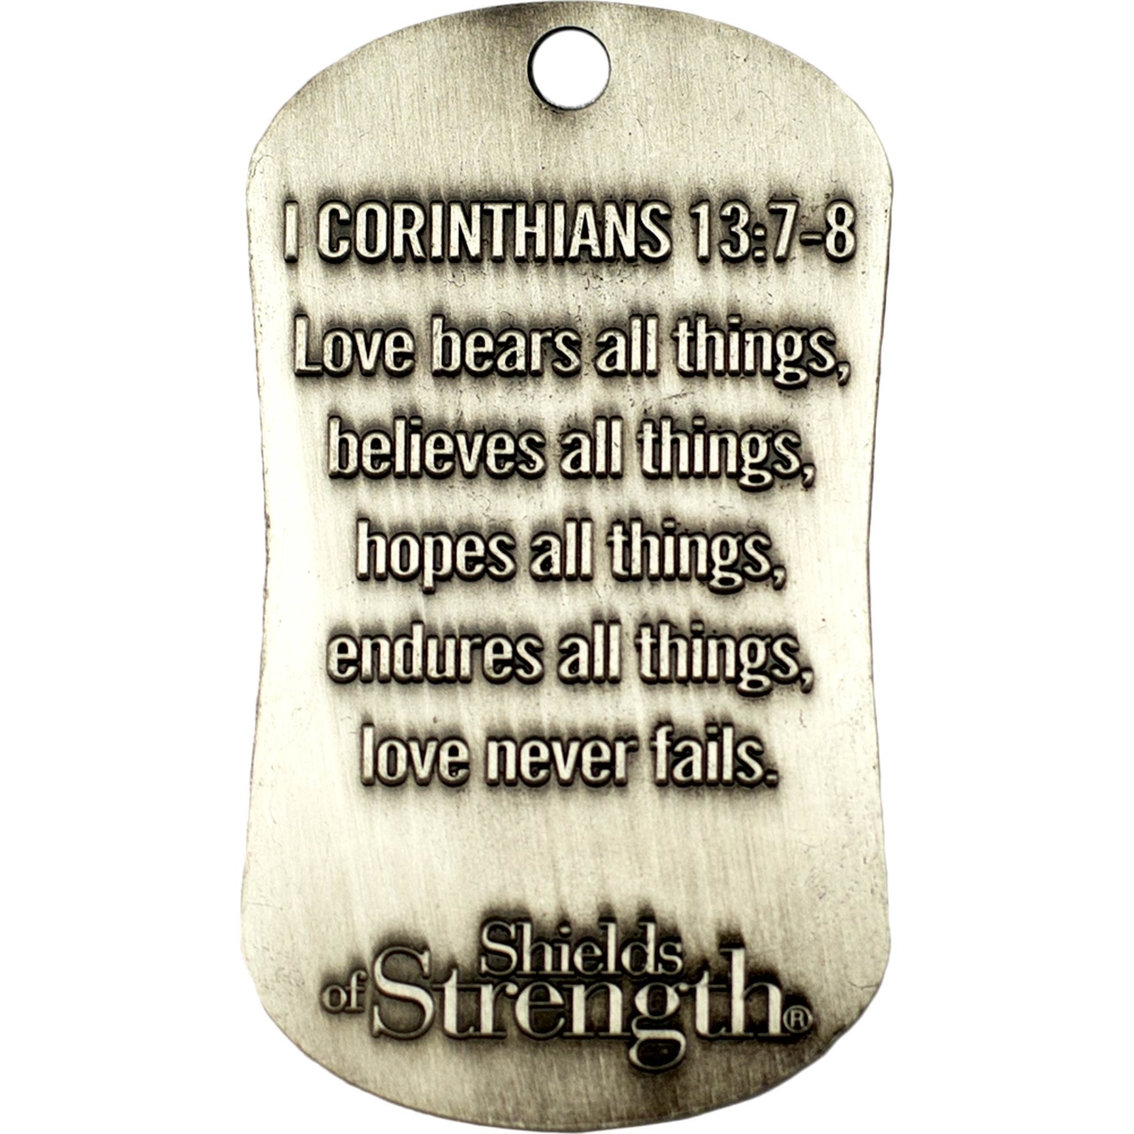 Shields of Strength Military Mom Antique Dog Tag Necklace, 1 Corinthians 13:7-8 - Image 2 of 2